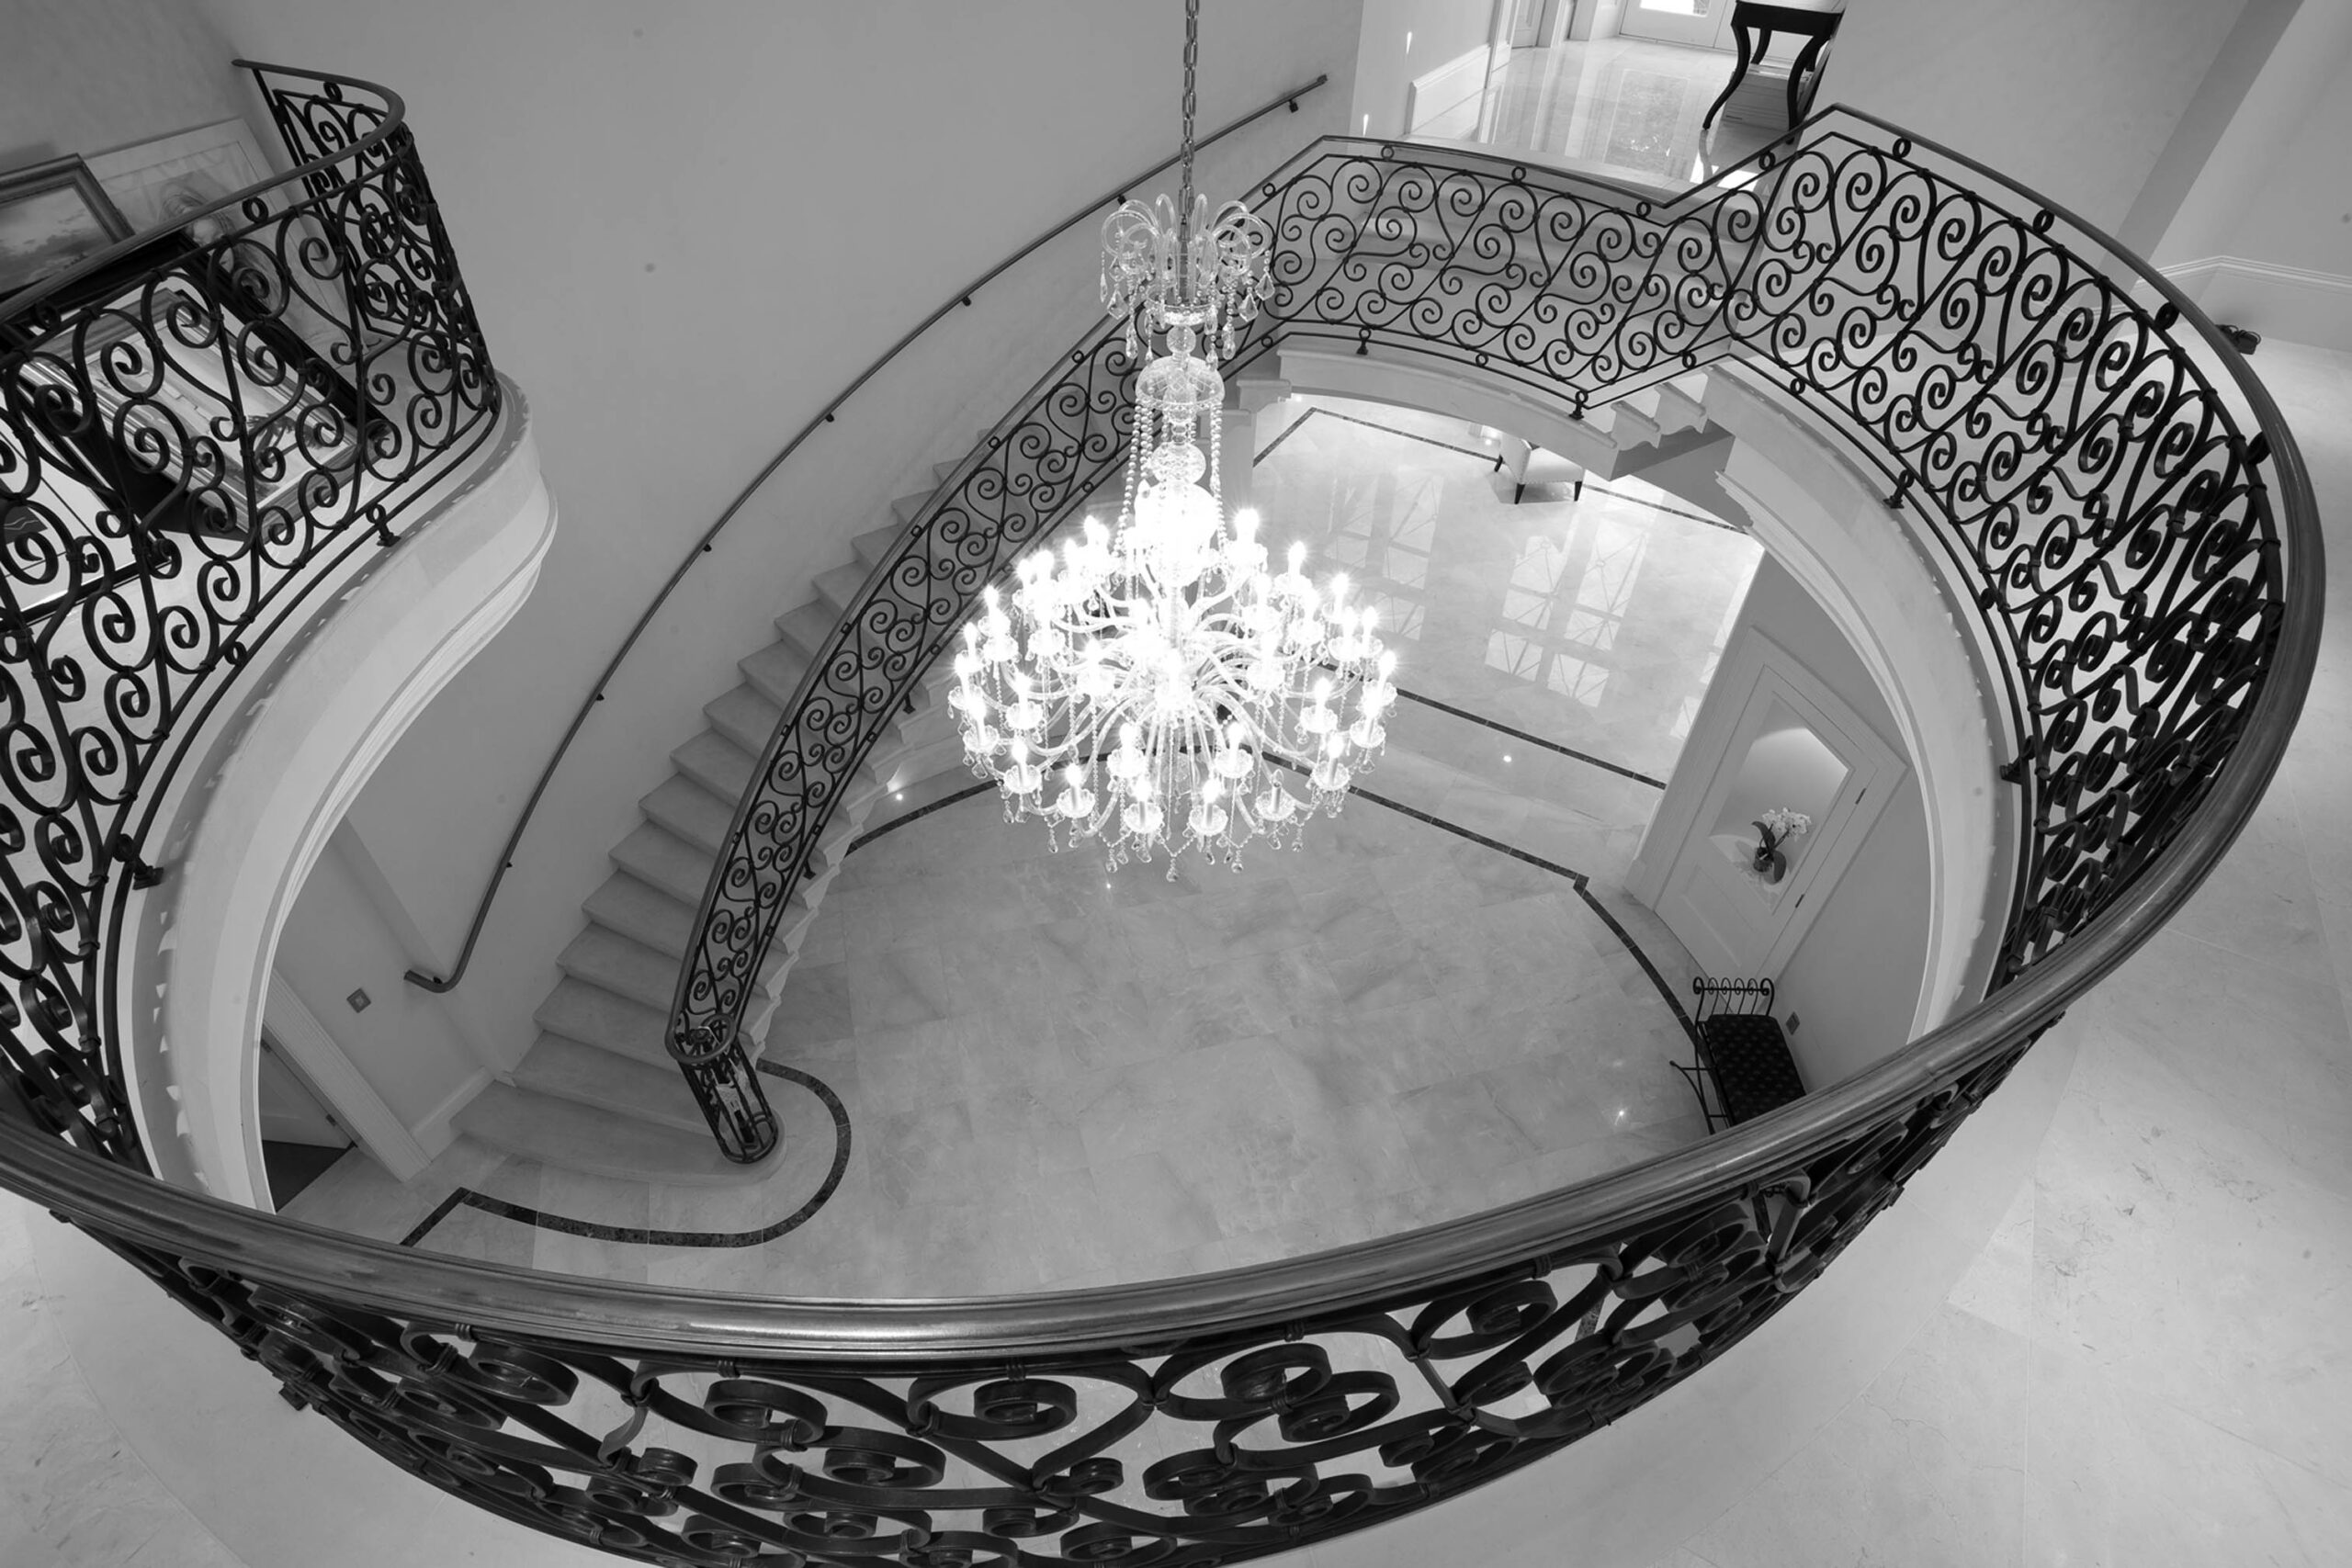 15. Cantilever stone staircase with solid stone in-flight gallery – Belfast